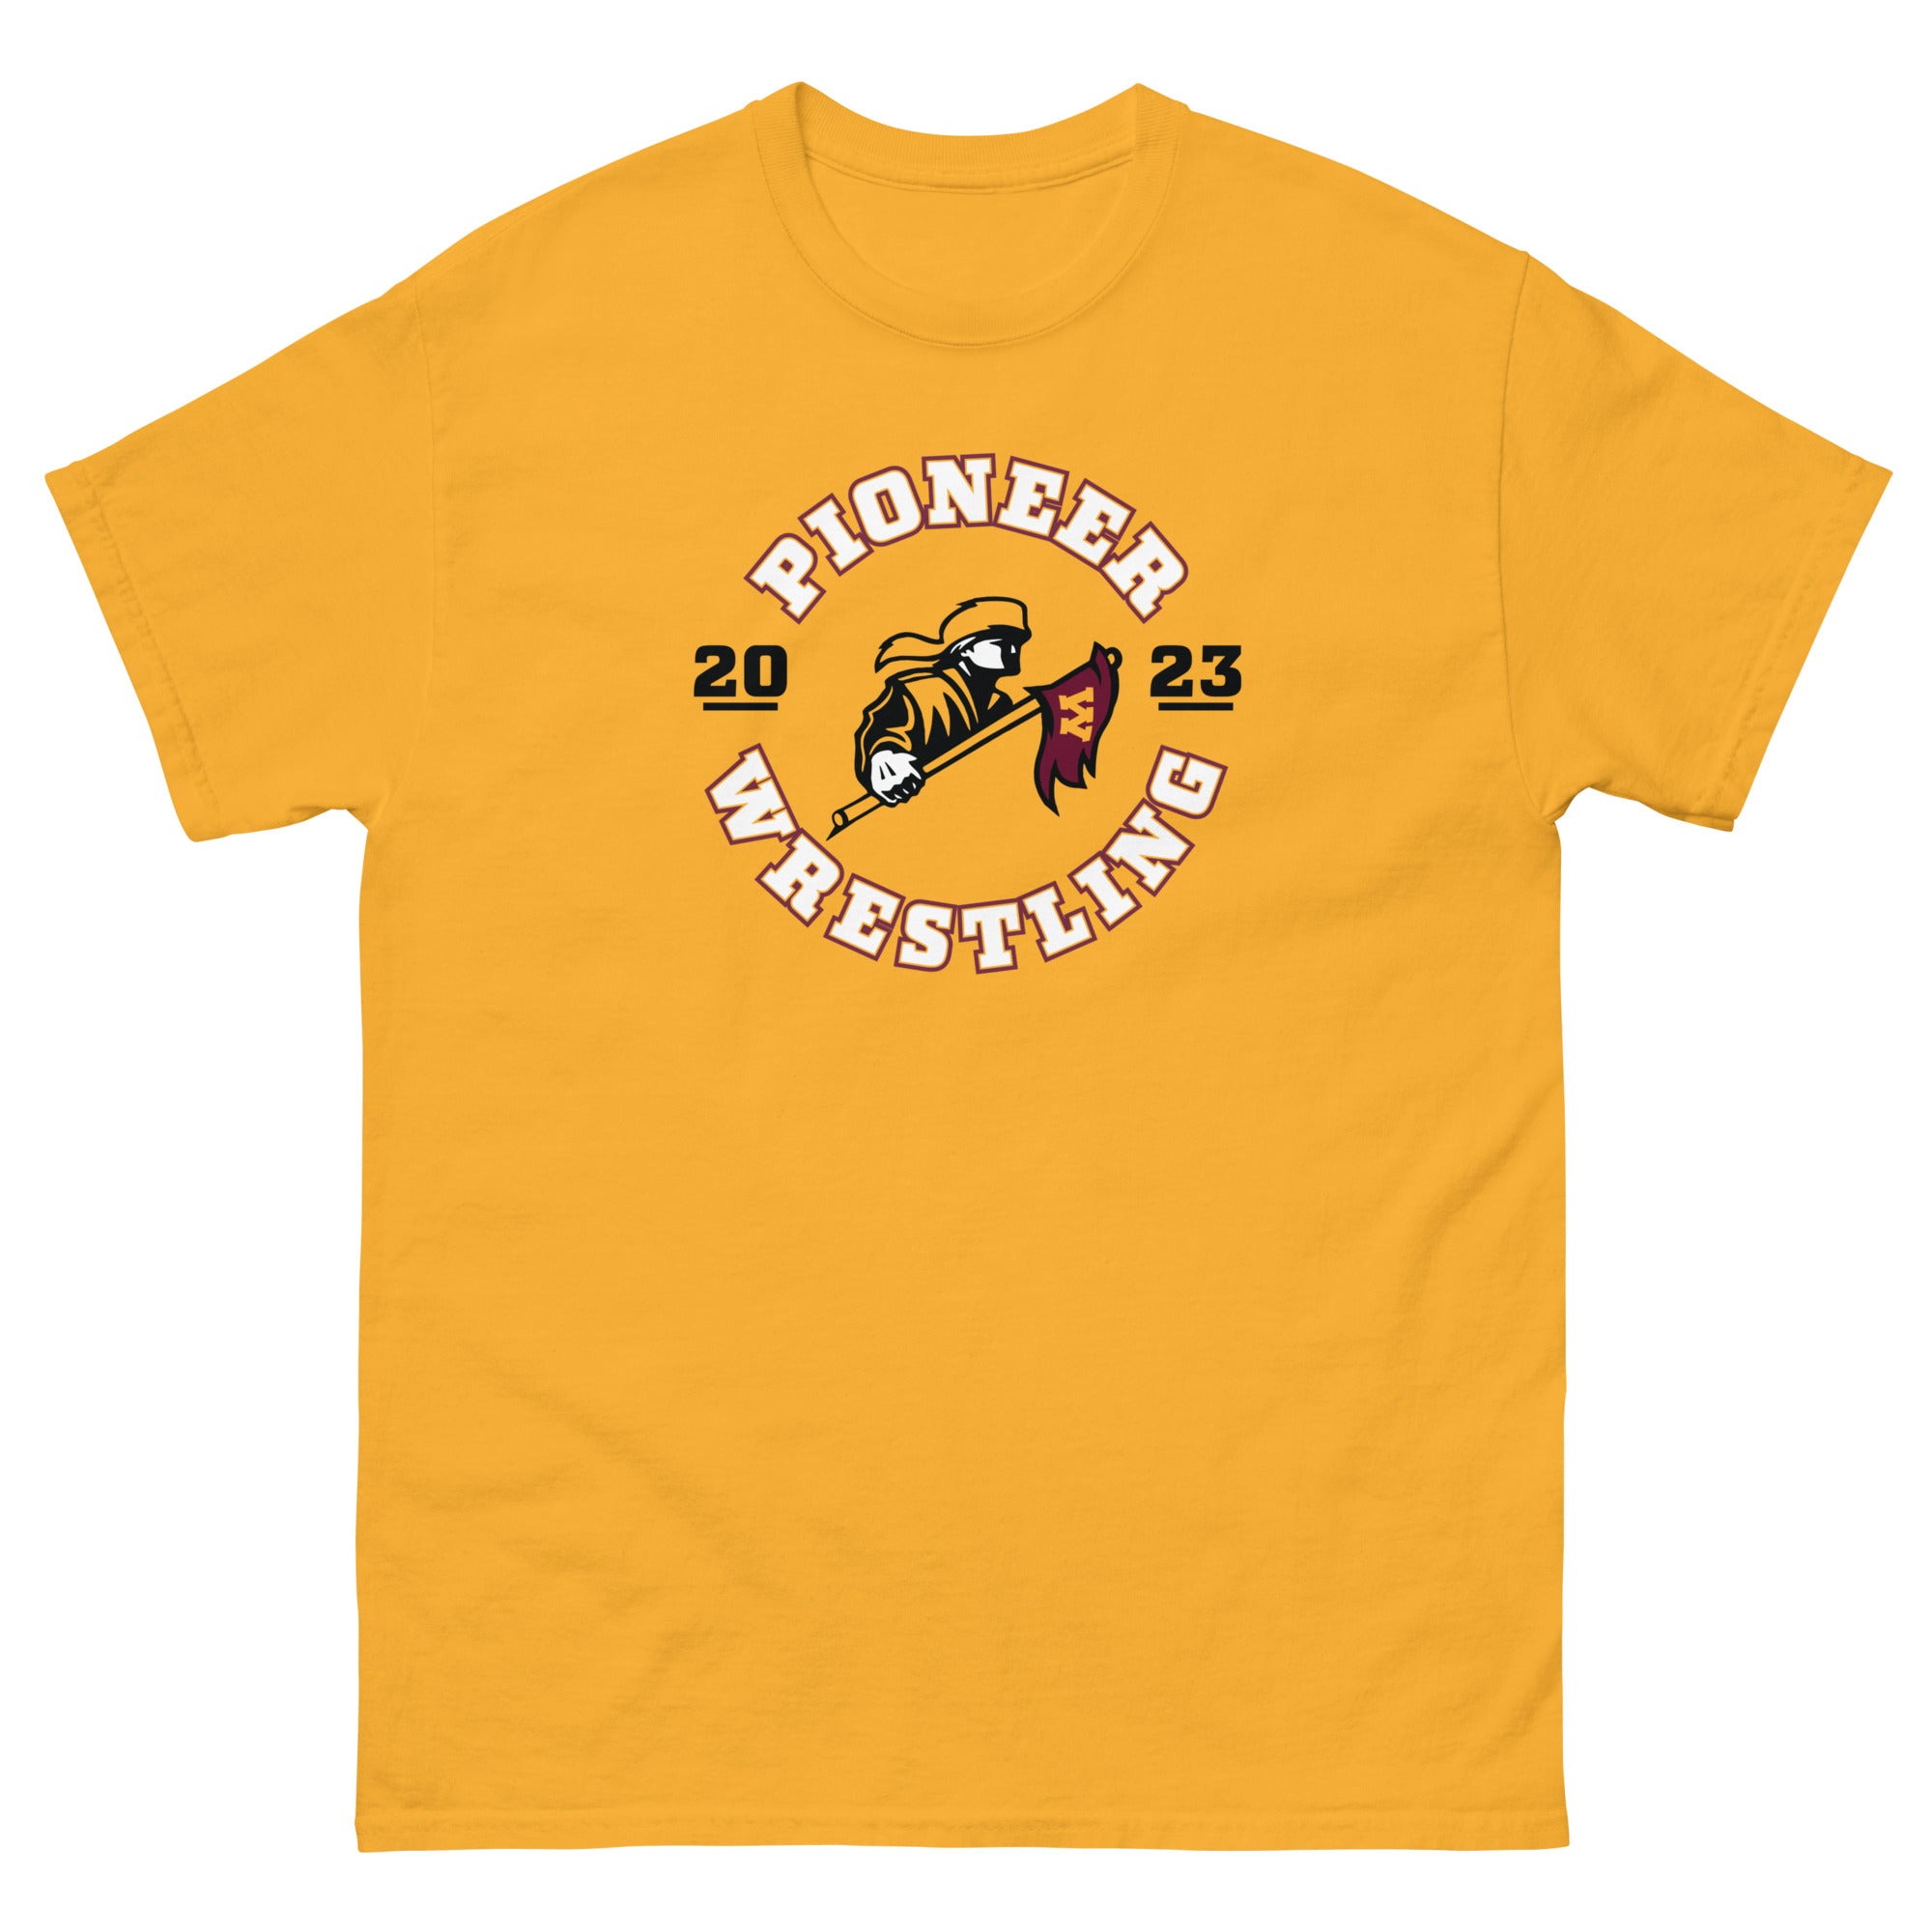 Wichita West High School Wrestling (Front Only) Mens Classic Tee